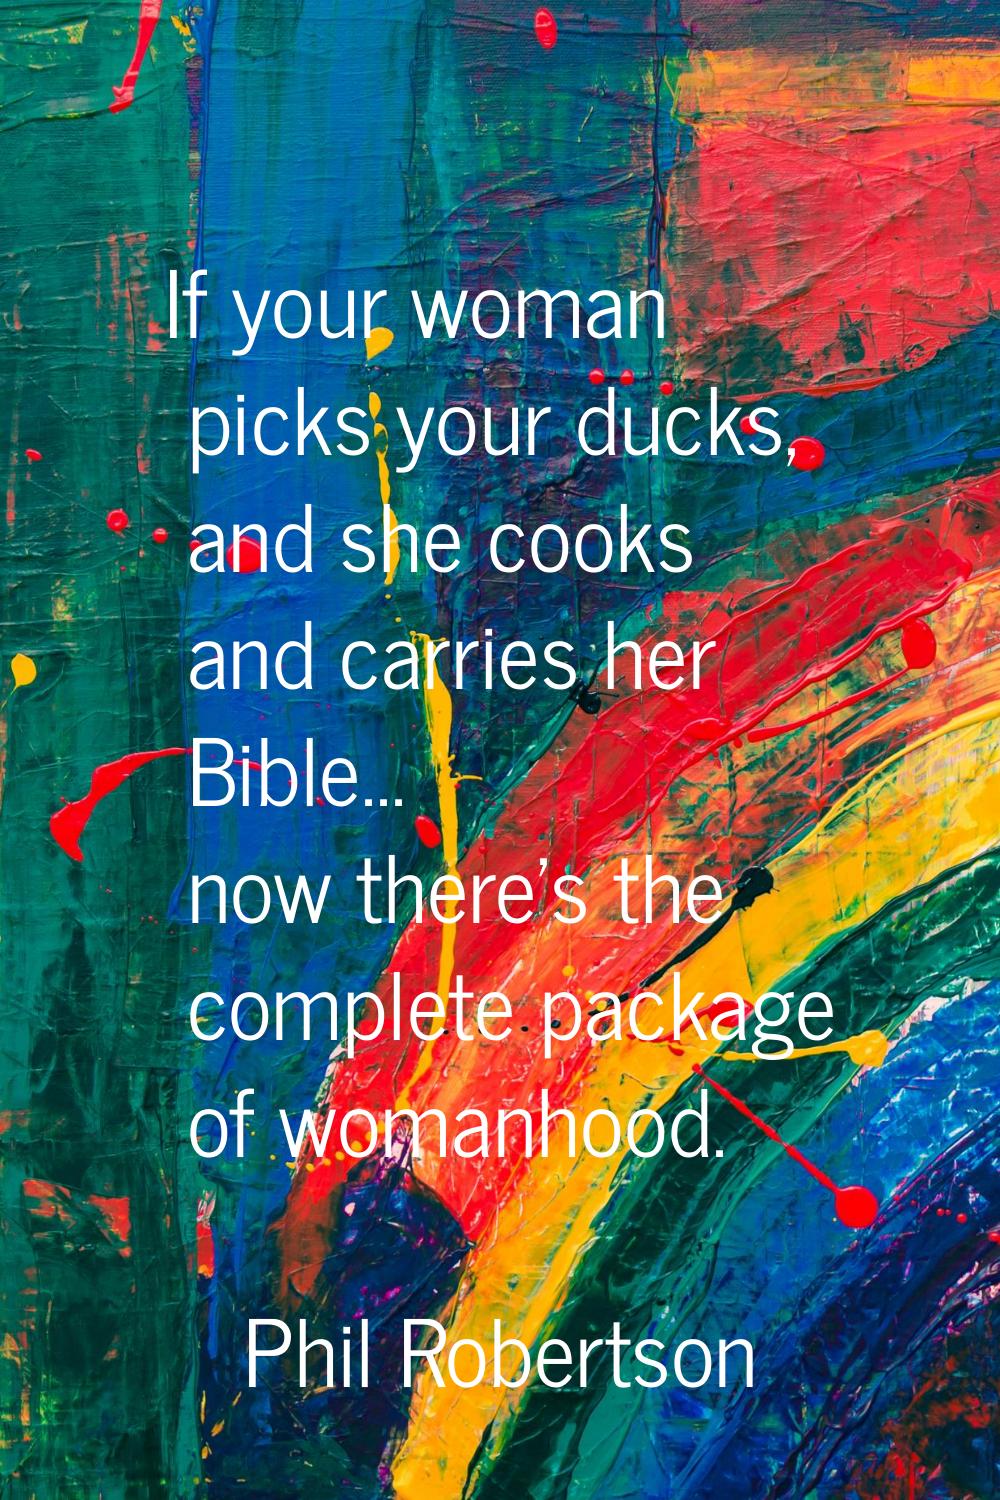 If your woman picks your ducks, and she cooks and carries her Bible... now there's the complete pac